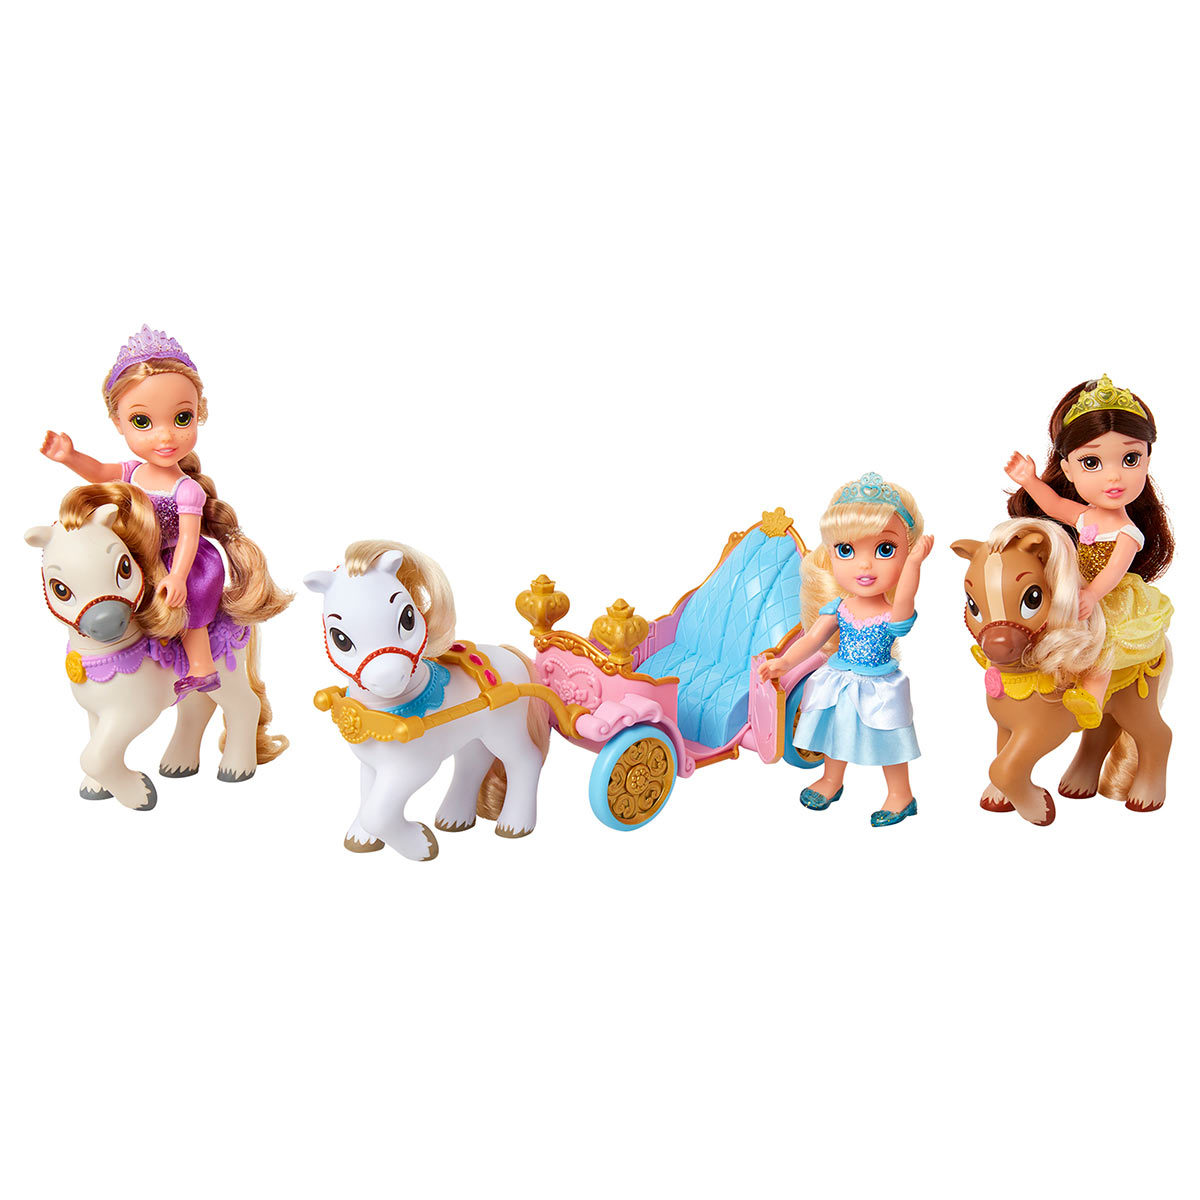 6 Inch (15cm) Disney Petite Princess Dolls And Carriage Gift Set (3+ Years)